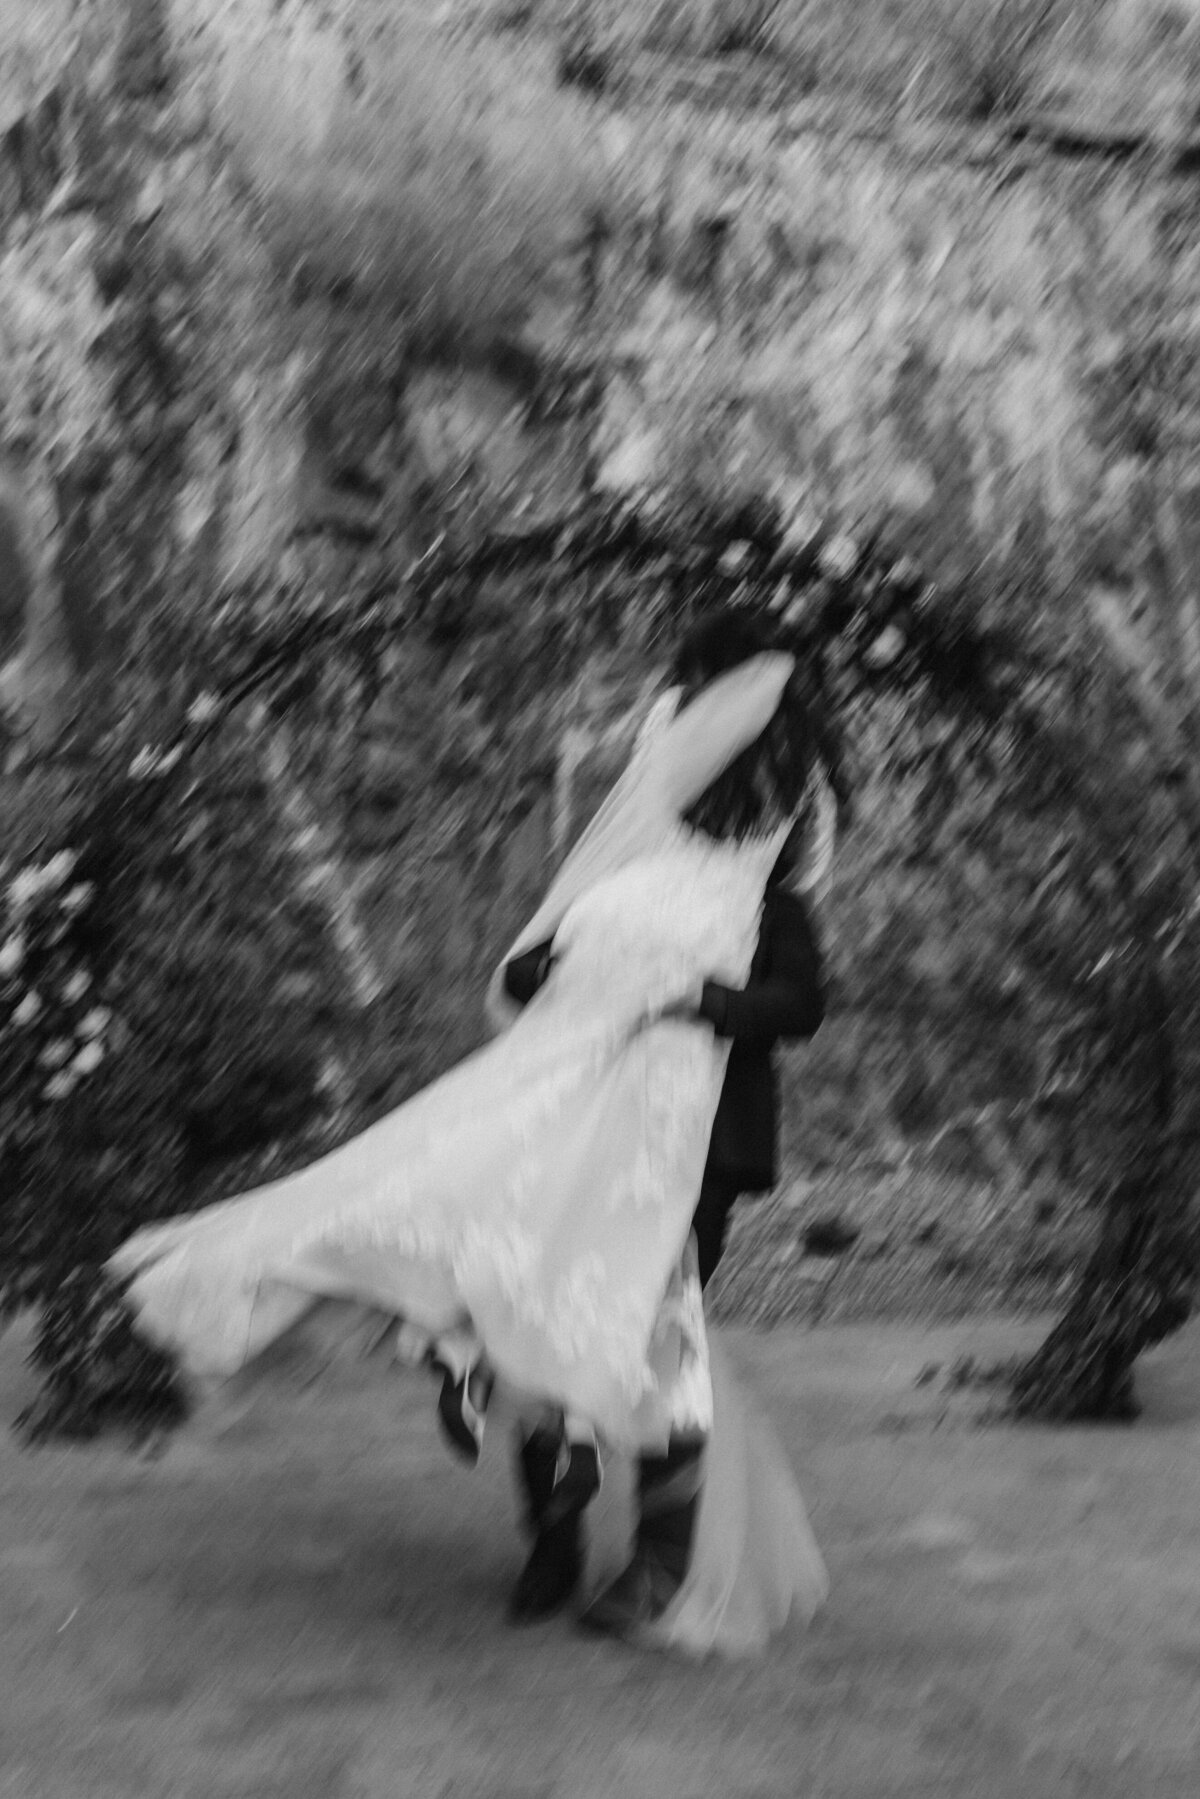 groom picked up bride in a celebratory twirl motion blur black and white film image